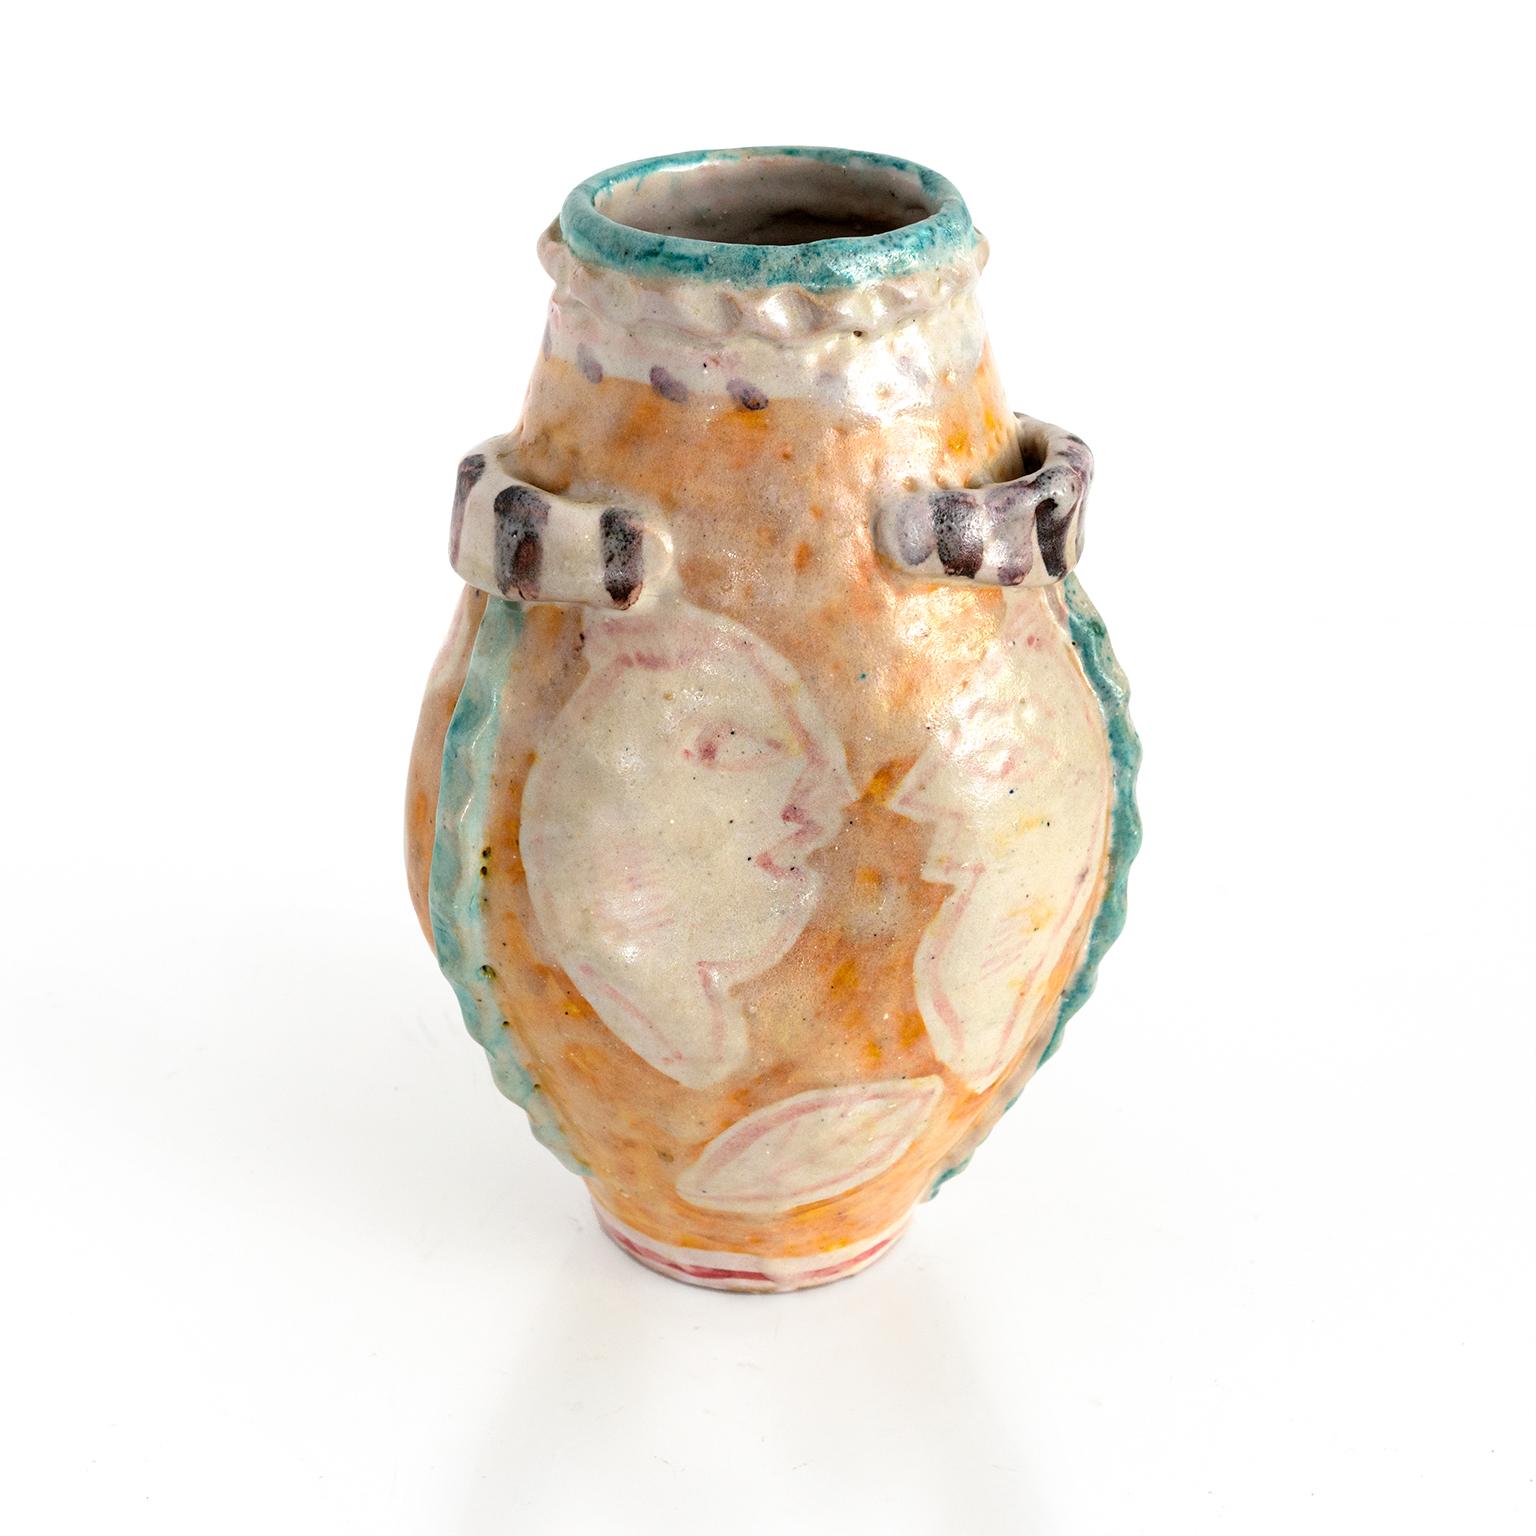 Salvatore Procida Hand Decorated Ceramic Vase, Vietri, Italy Mid-Century Modern In Good Condition For Sale In New York, NY